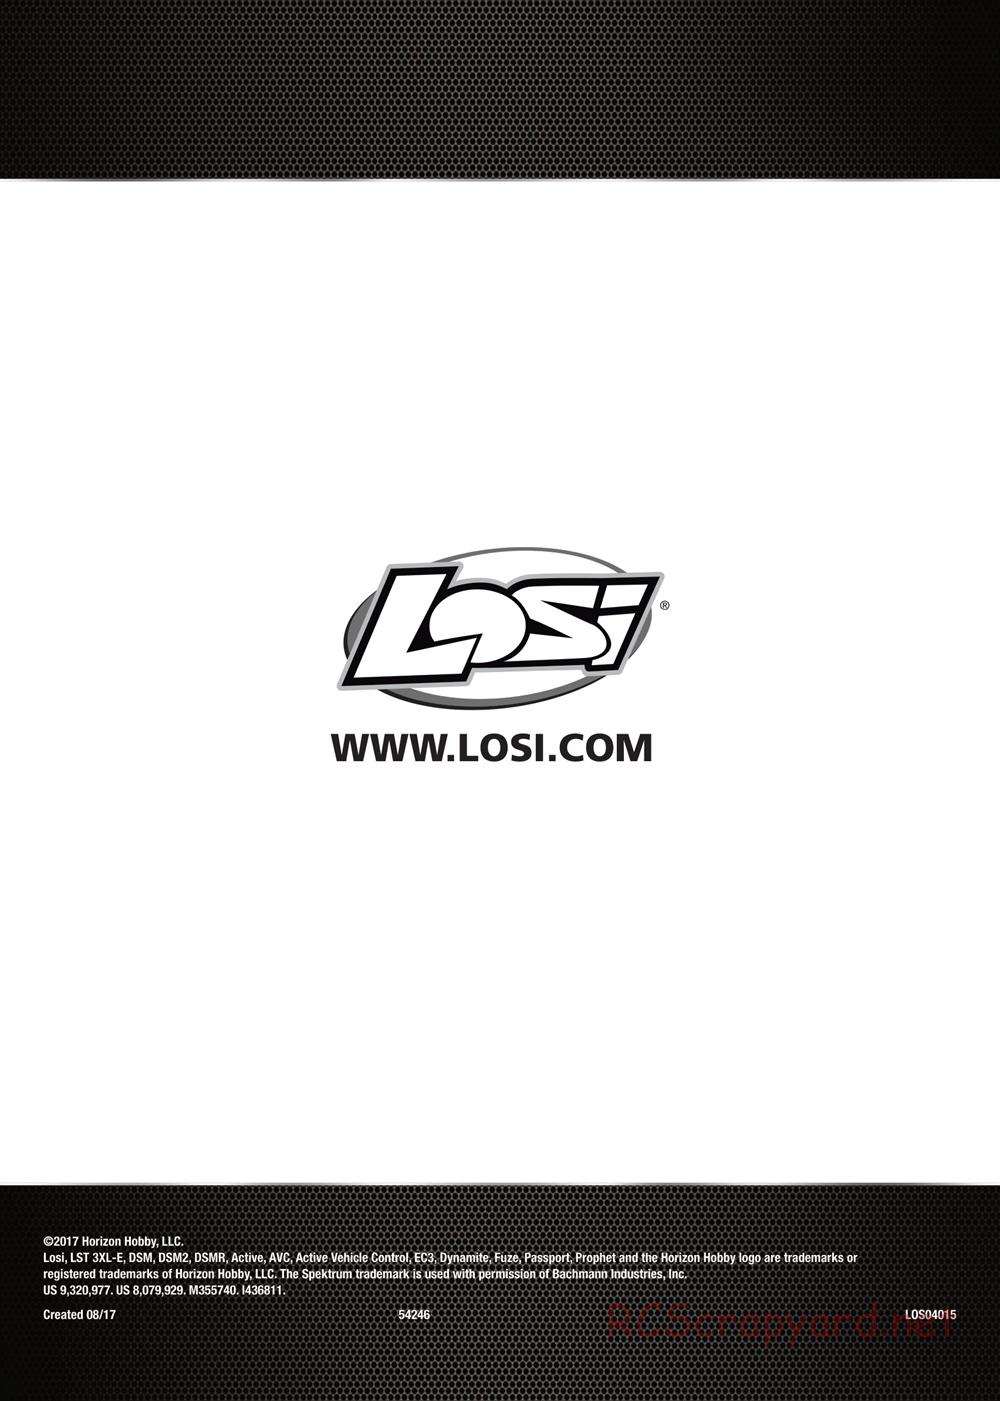 Team Losi - LST 3XL-E - Manual - Page 17